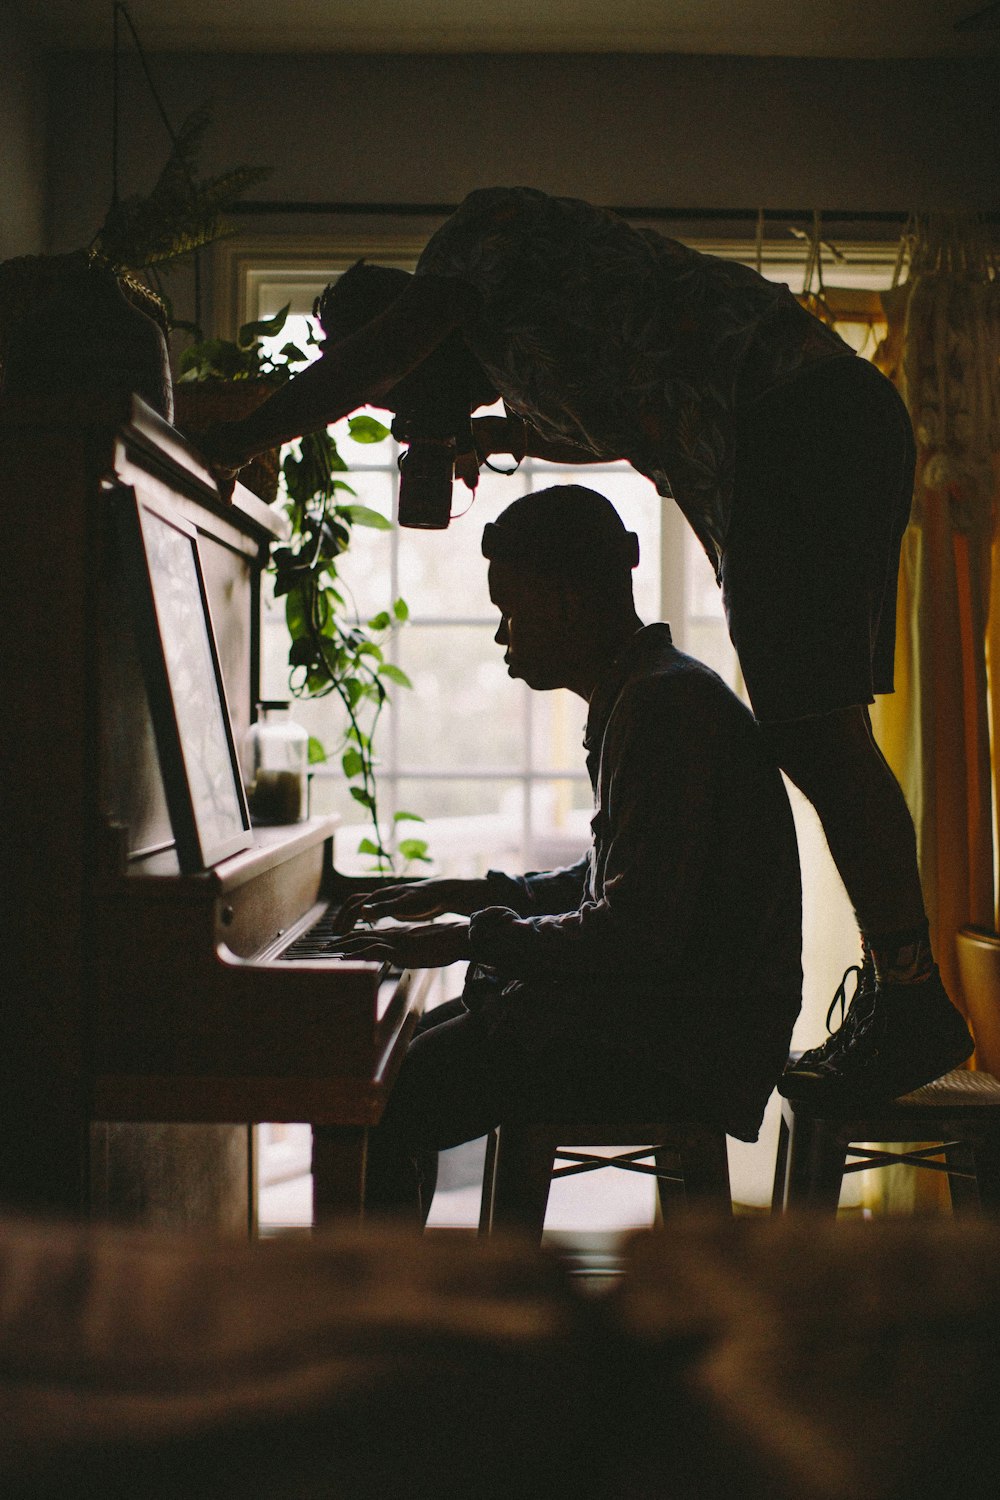 person sitting while playing piano while other man standing on stool while taking picture of person's hand on piano inside room